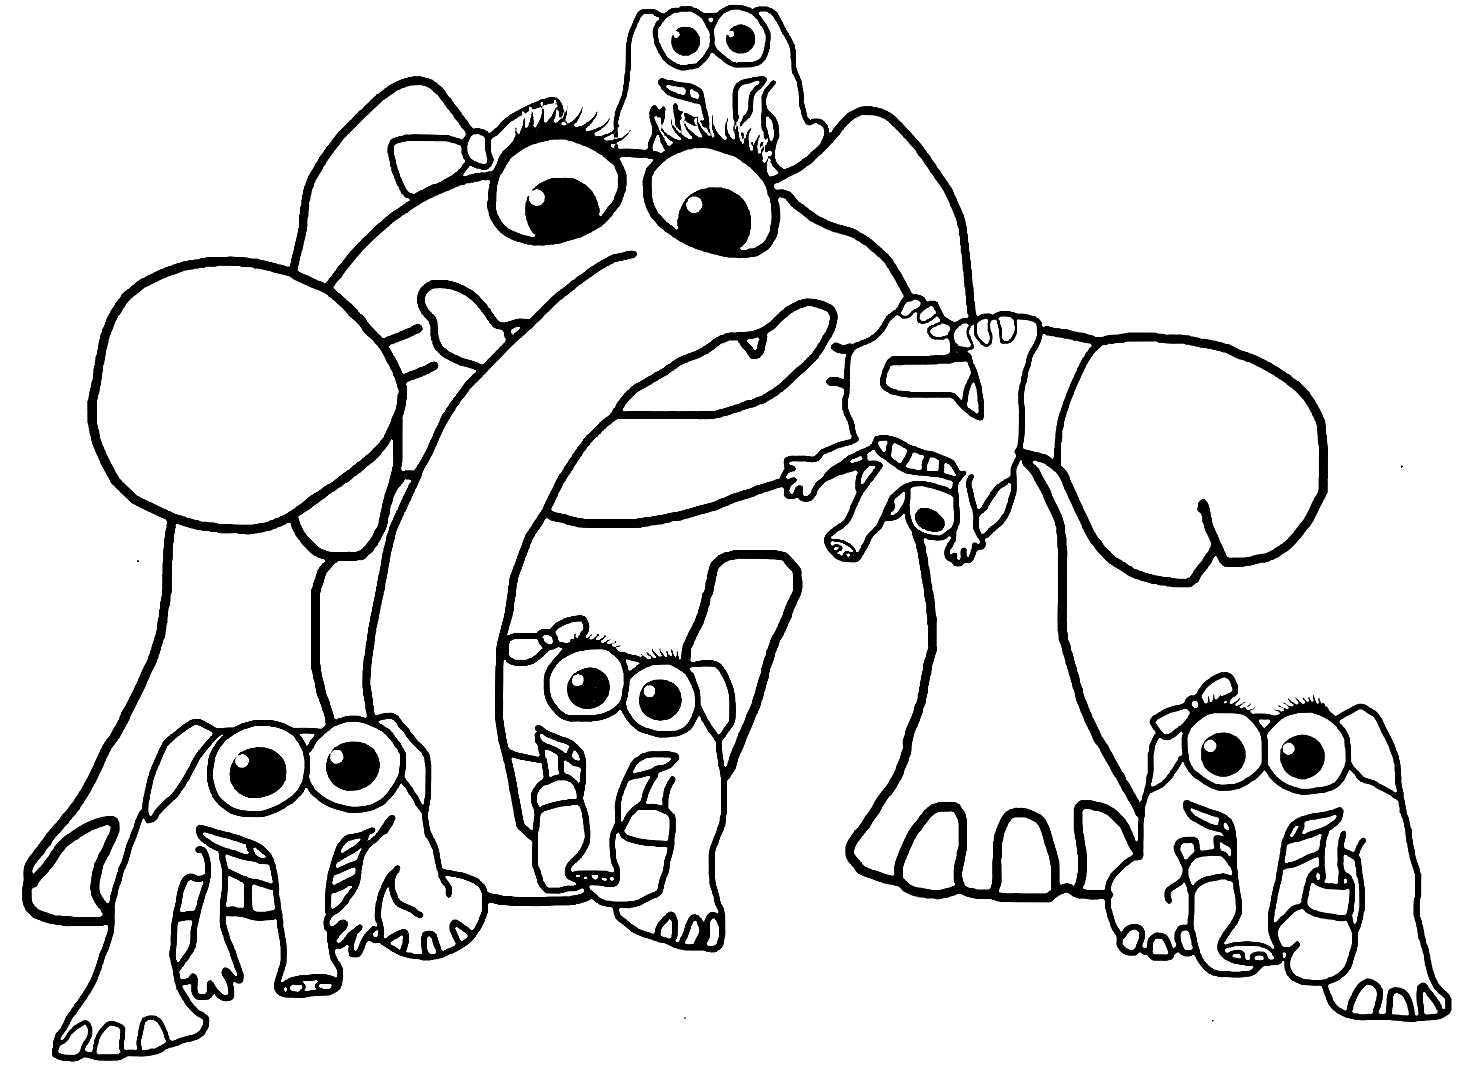 Coloring Pages - Garten of Banban 4 – Having fun with children